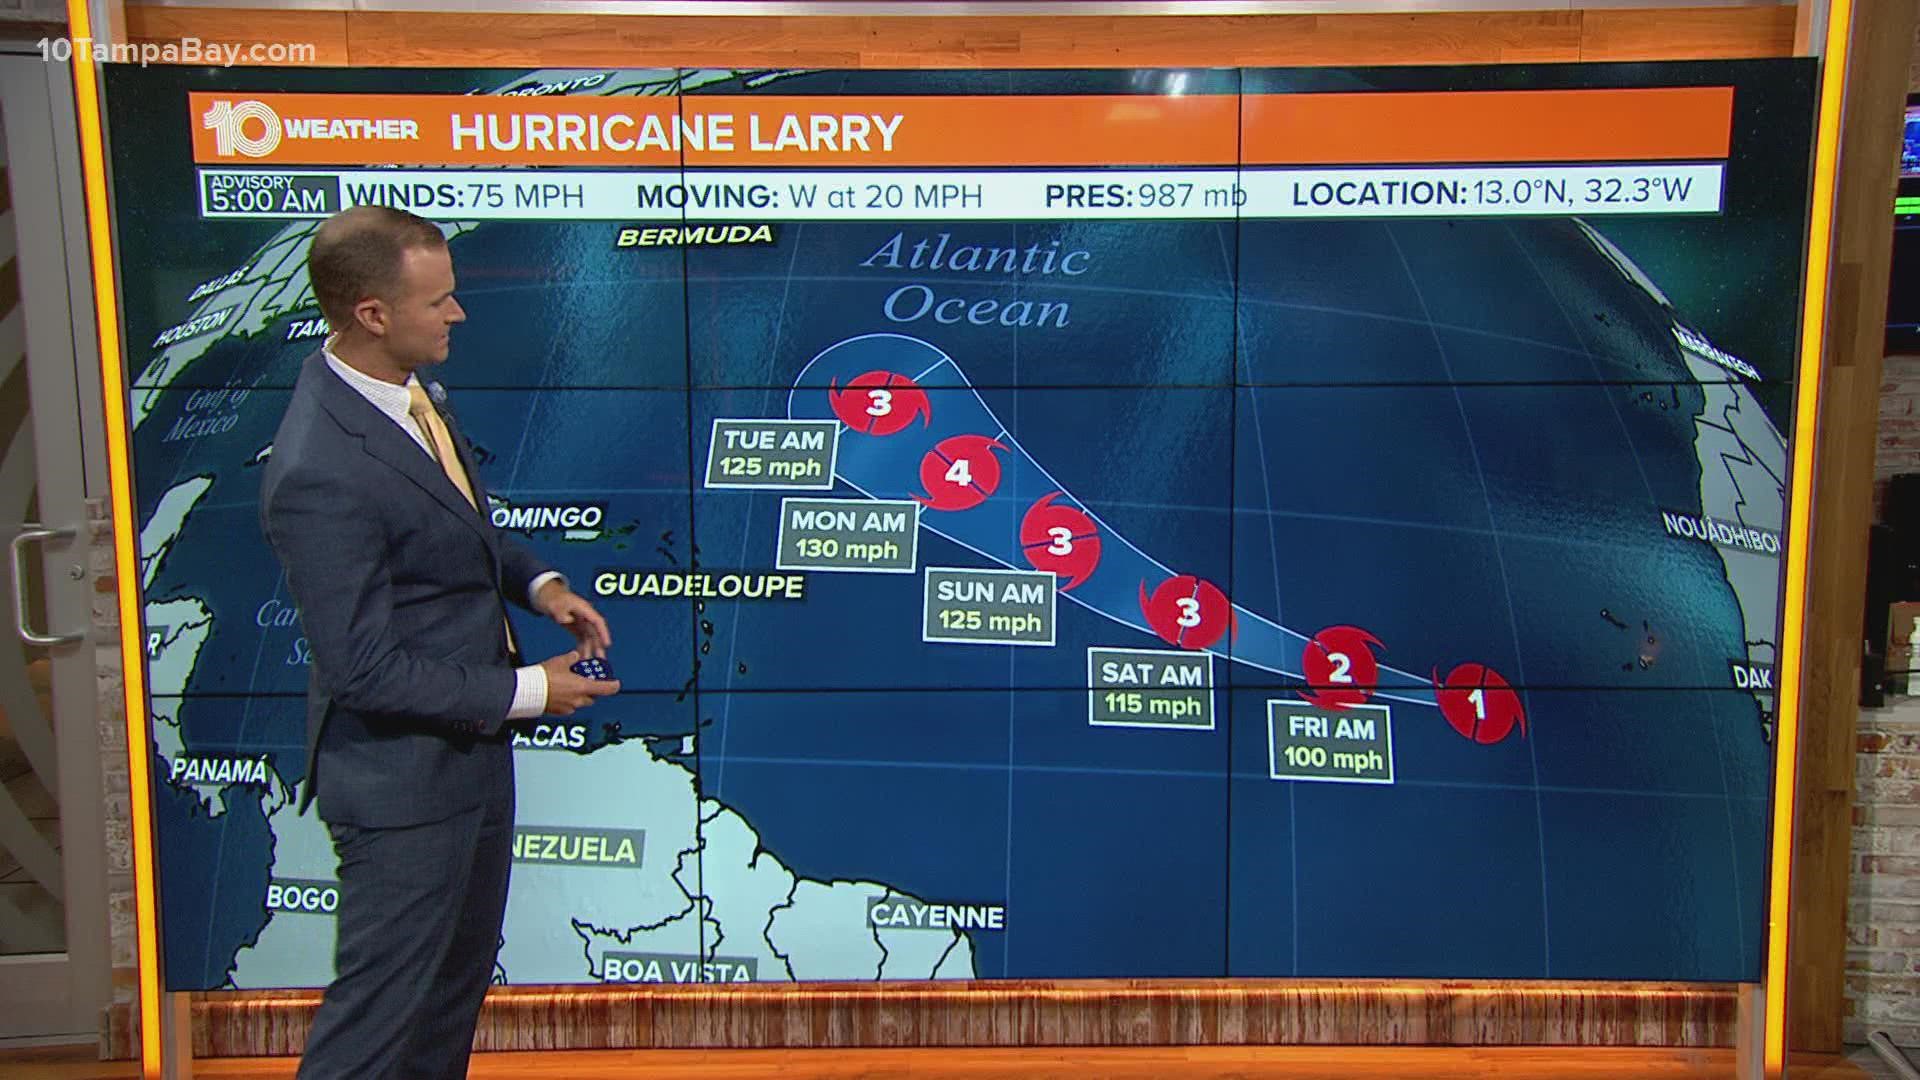 Larry is forecast to reach major hurricane strength this weekend.